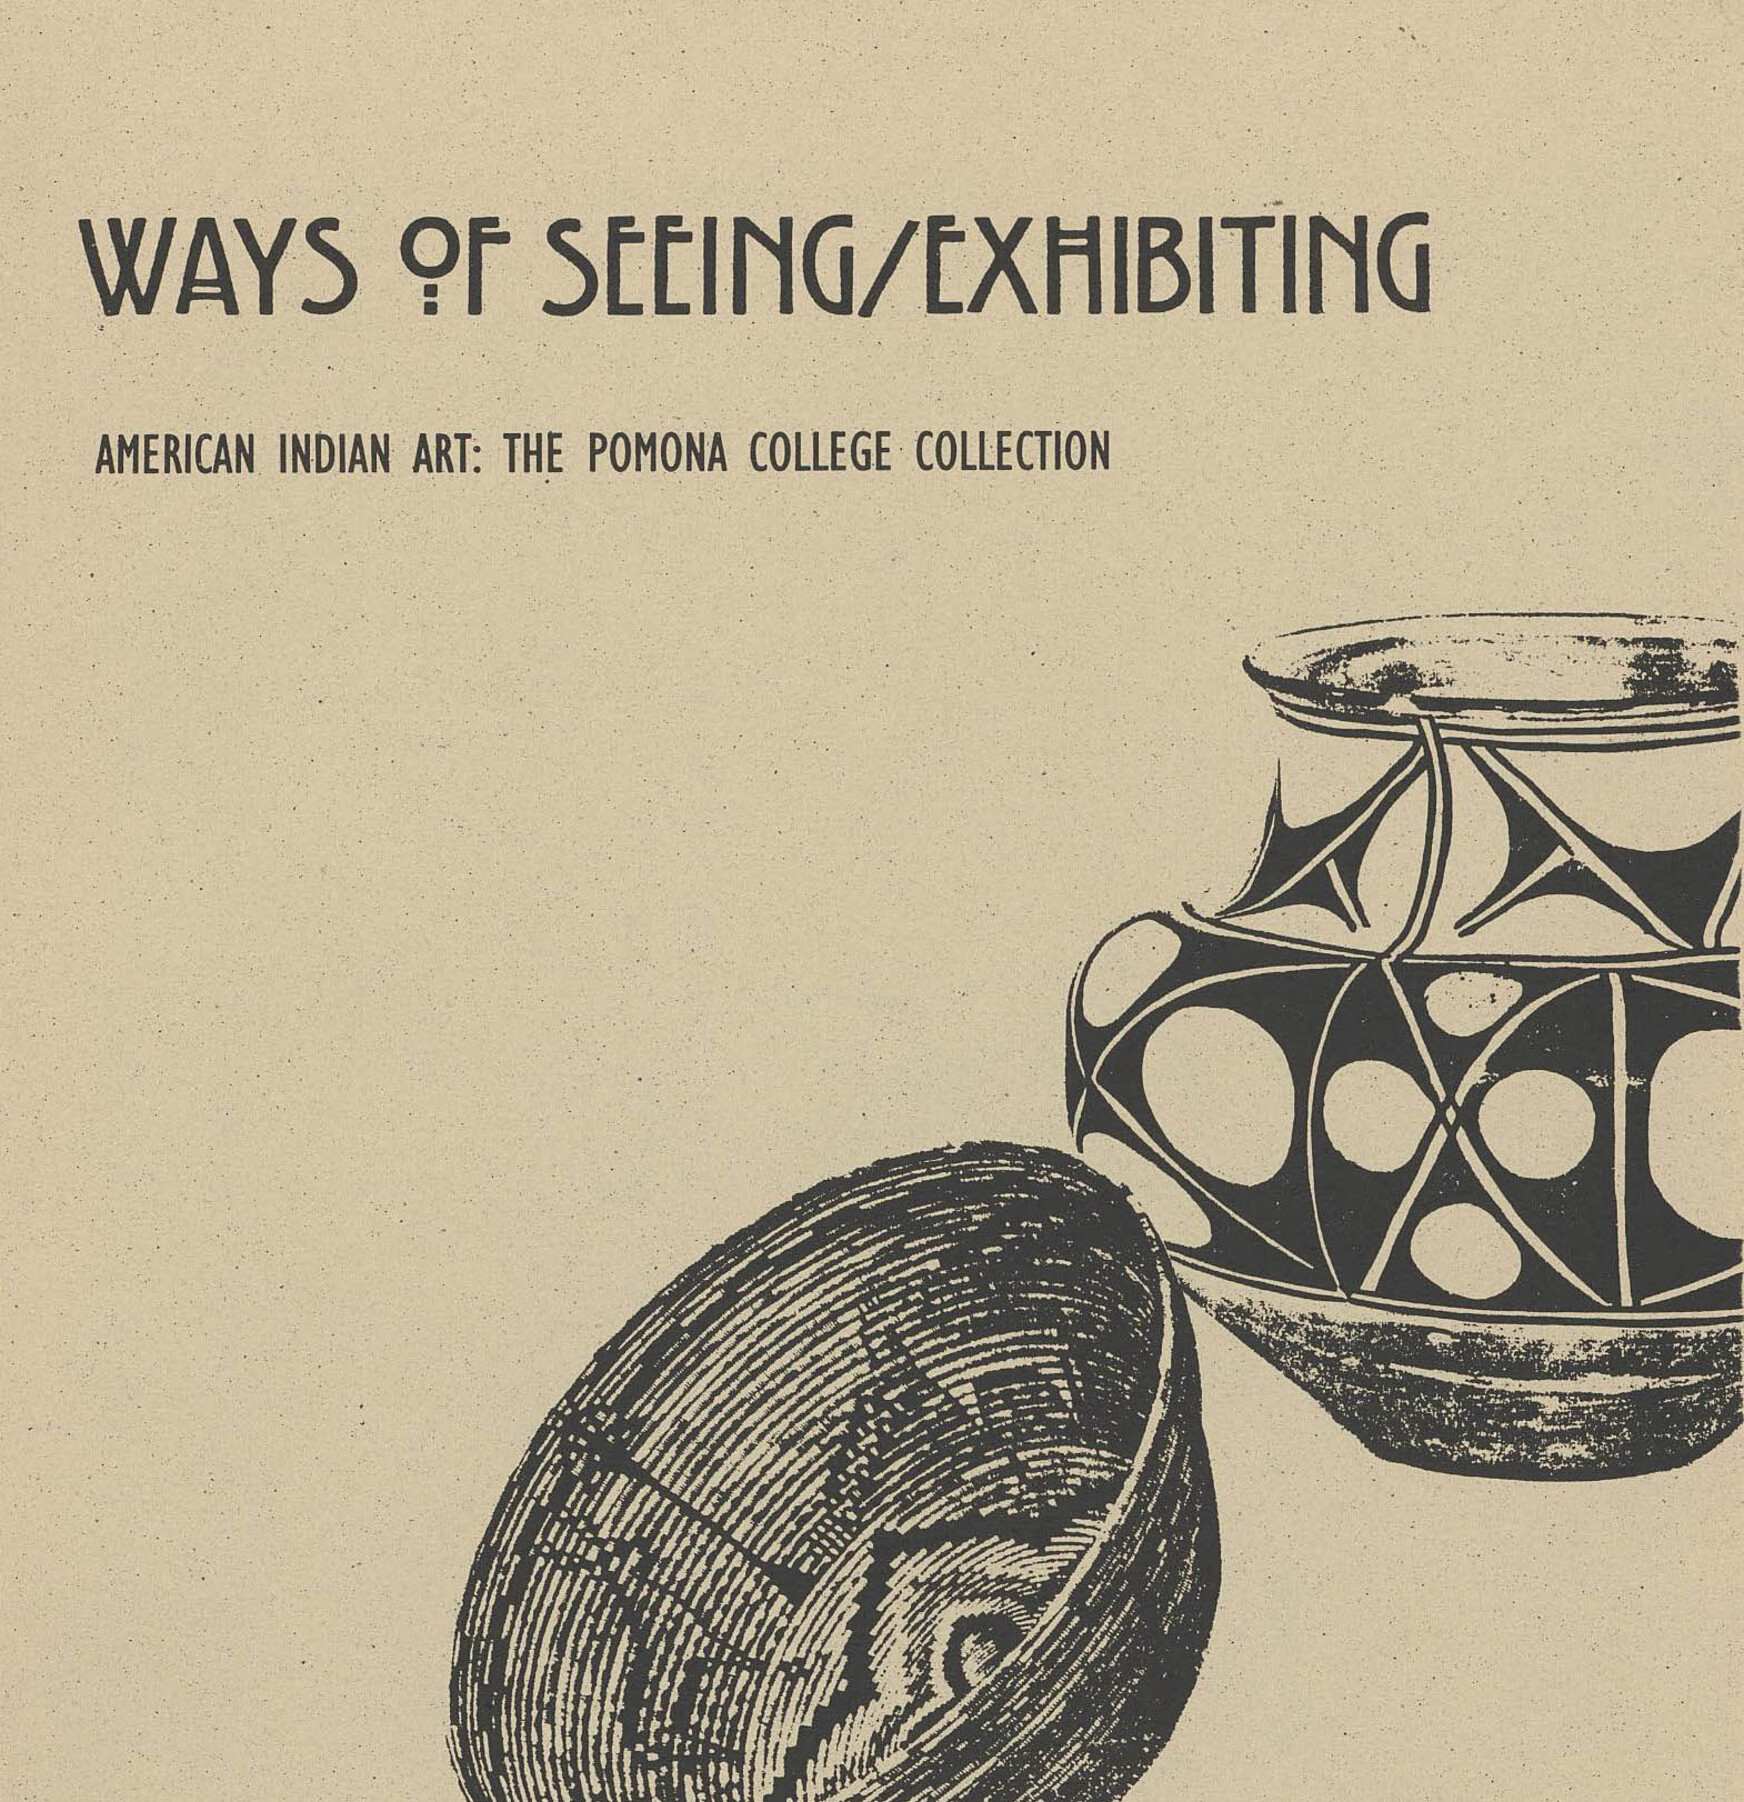 front cover of exhibition catalogue with the the title "Ways of Seeing/Exhibiting"